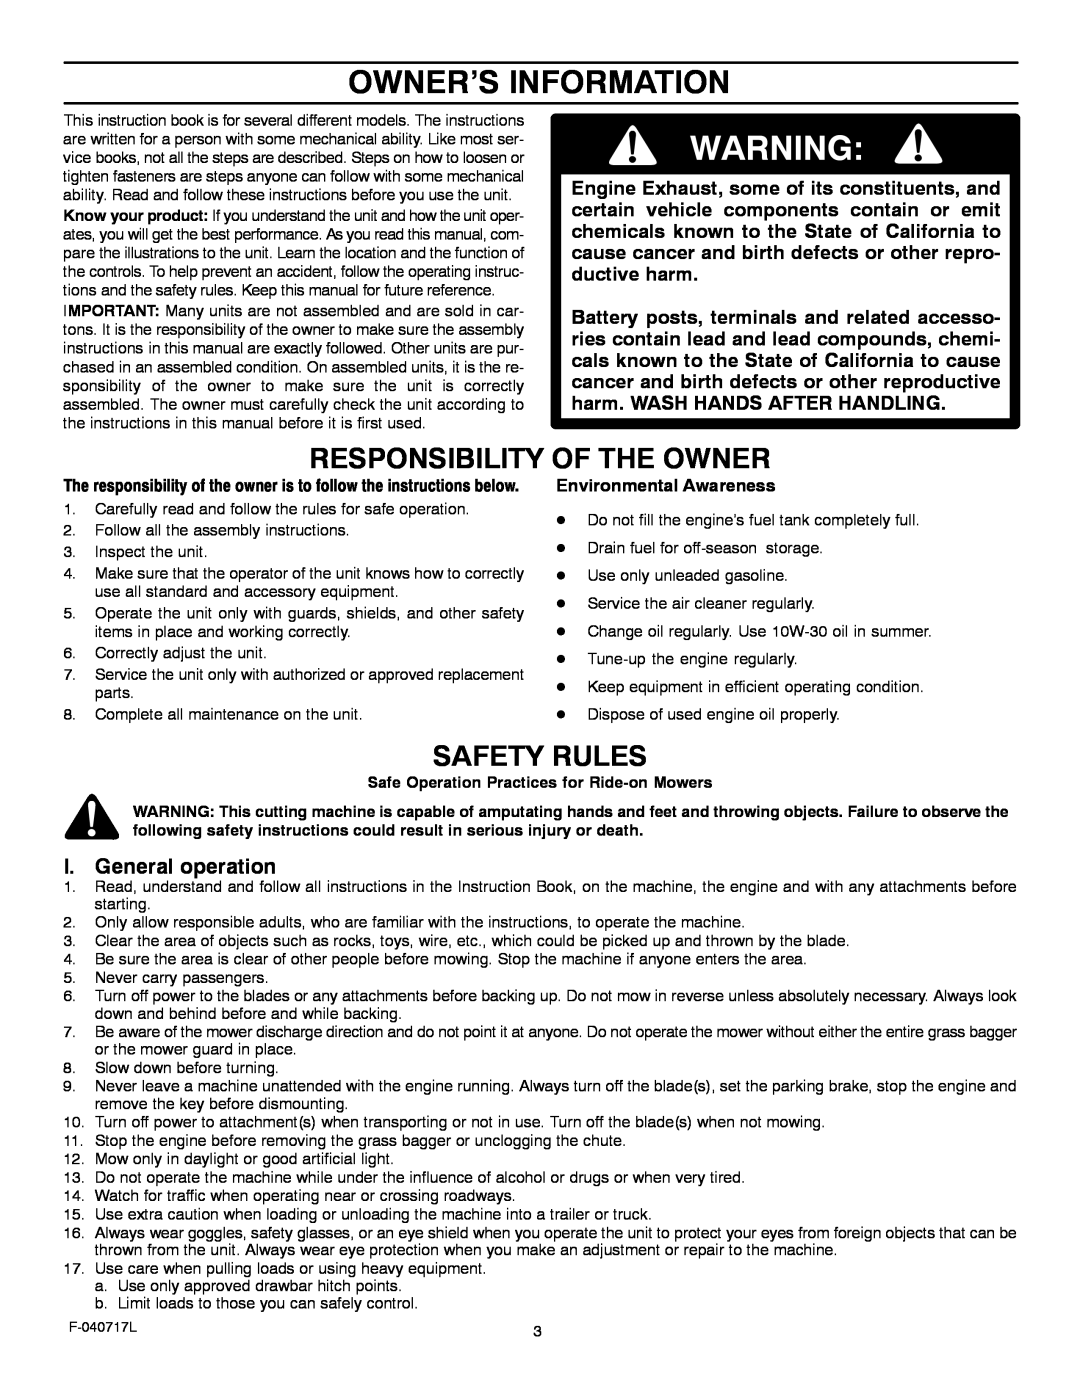 Murray 387002x92A manual Owner’S Information, Responsibility Of The Owner, Safety Rules, I. General operation 